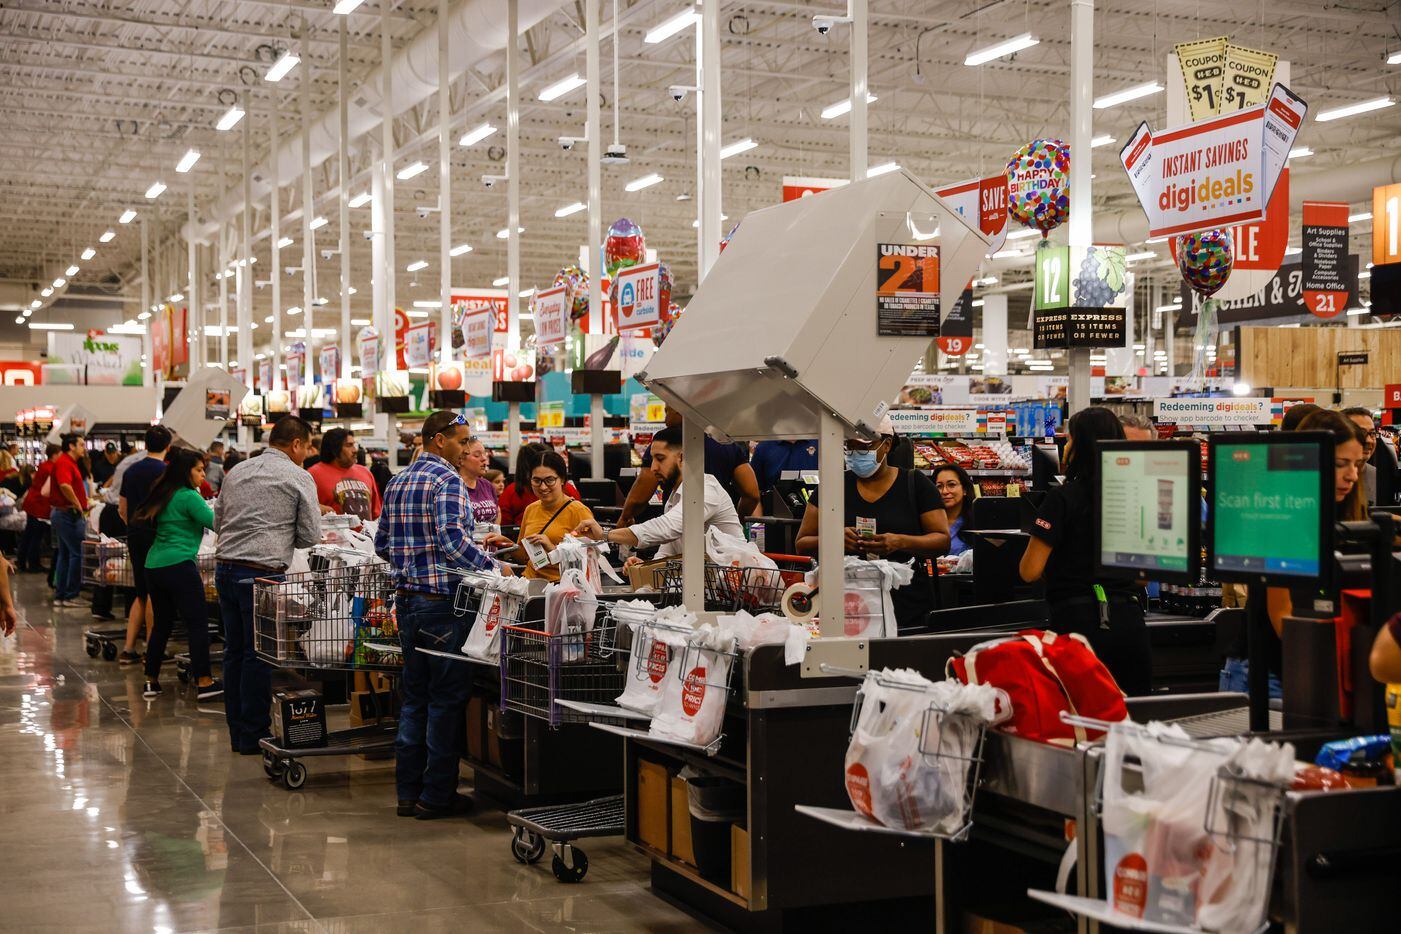 The new H-E-B store that opened its door to the public at 6AM in Frisco on Wednesday, Sept....